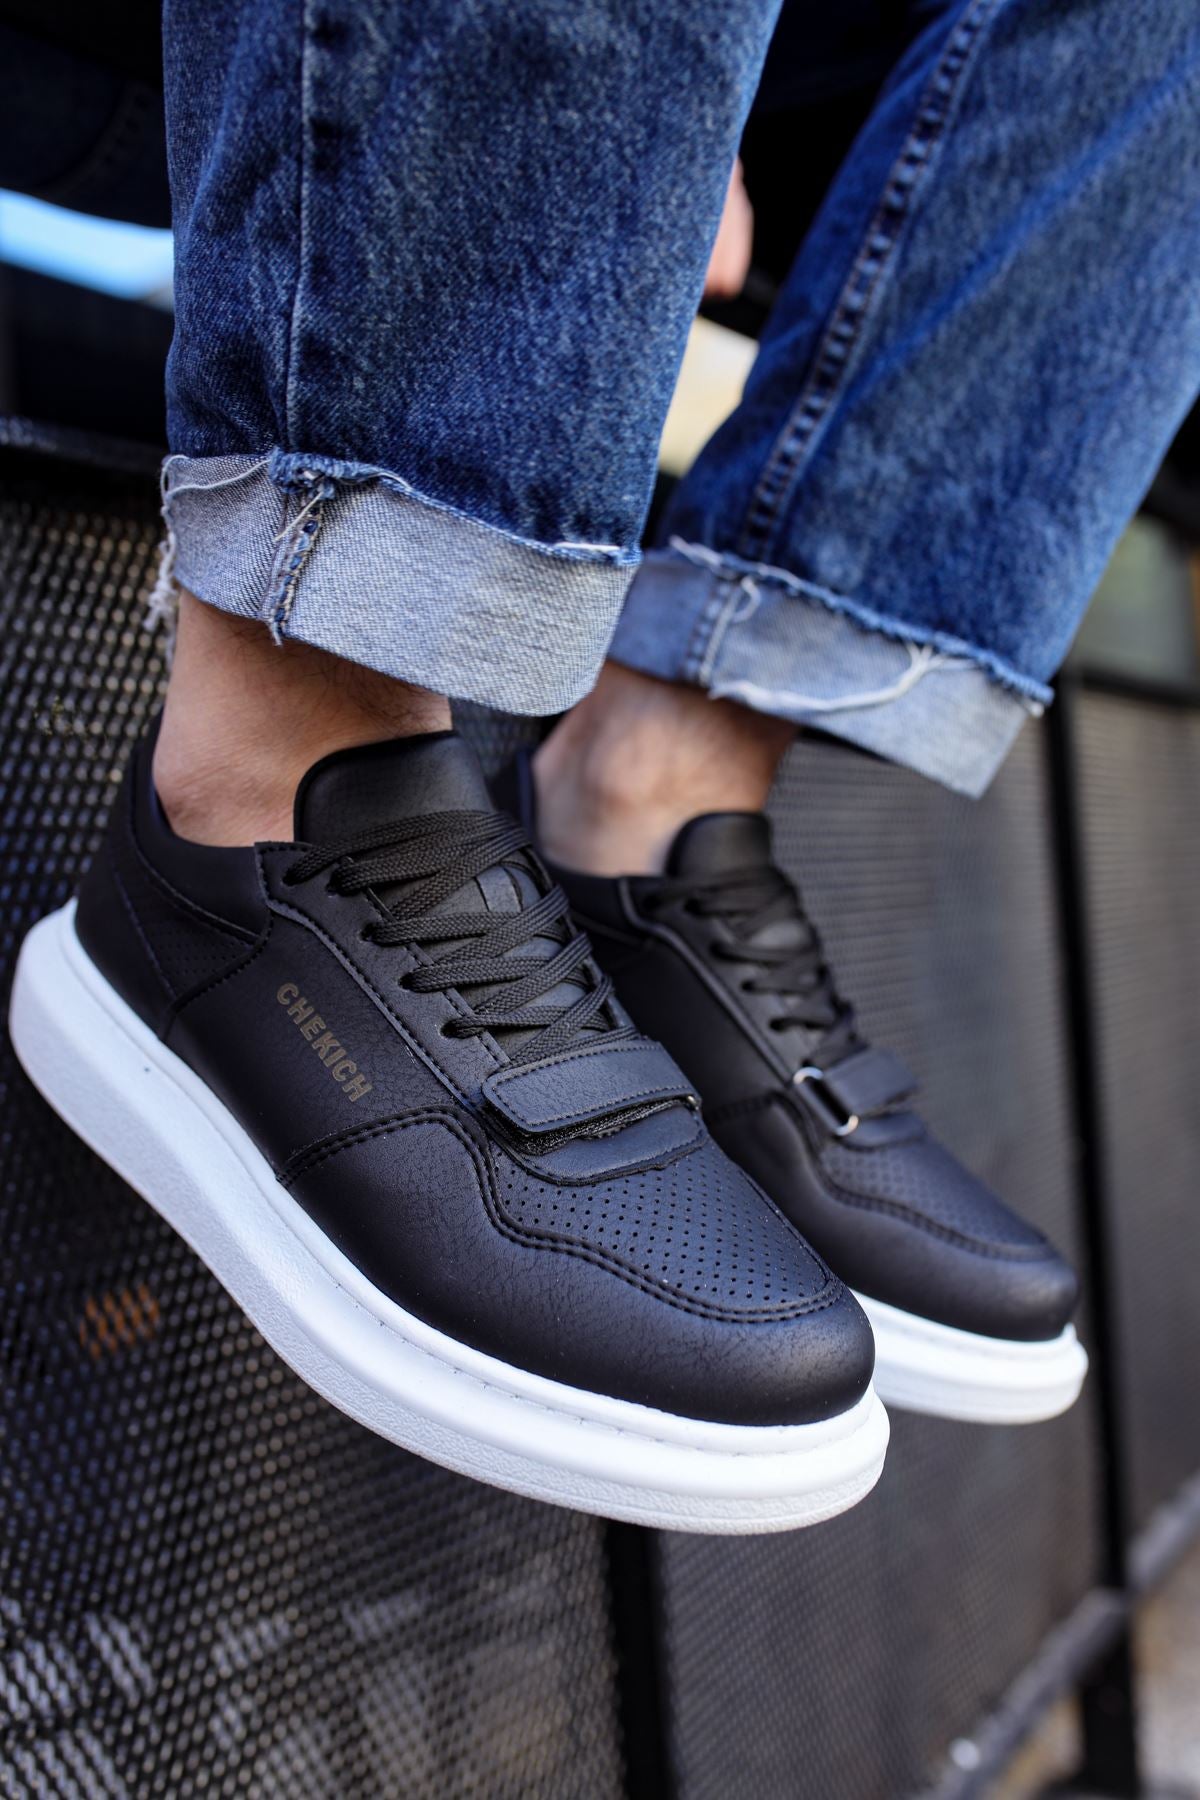 Original Design CH073 Men's Black-White Sole Lace-Up Casual Sneaker Sports Shoes - STREETMODE ™